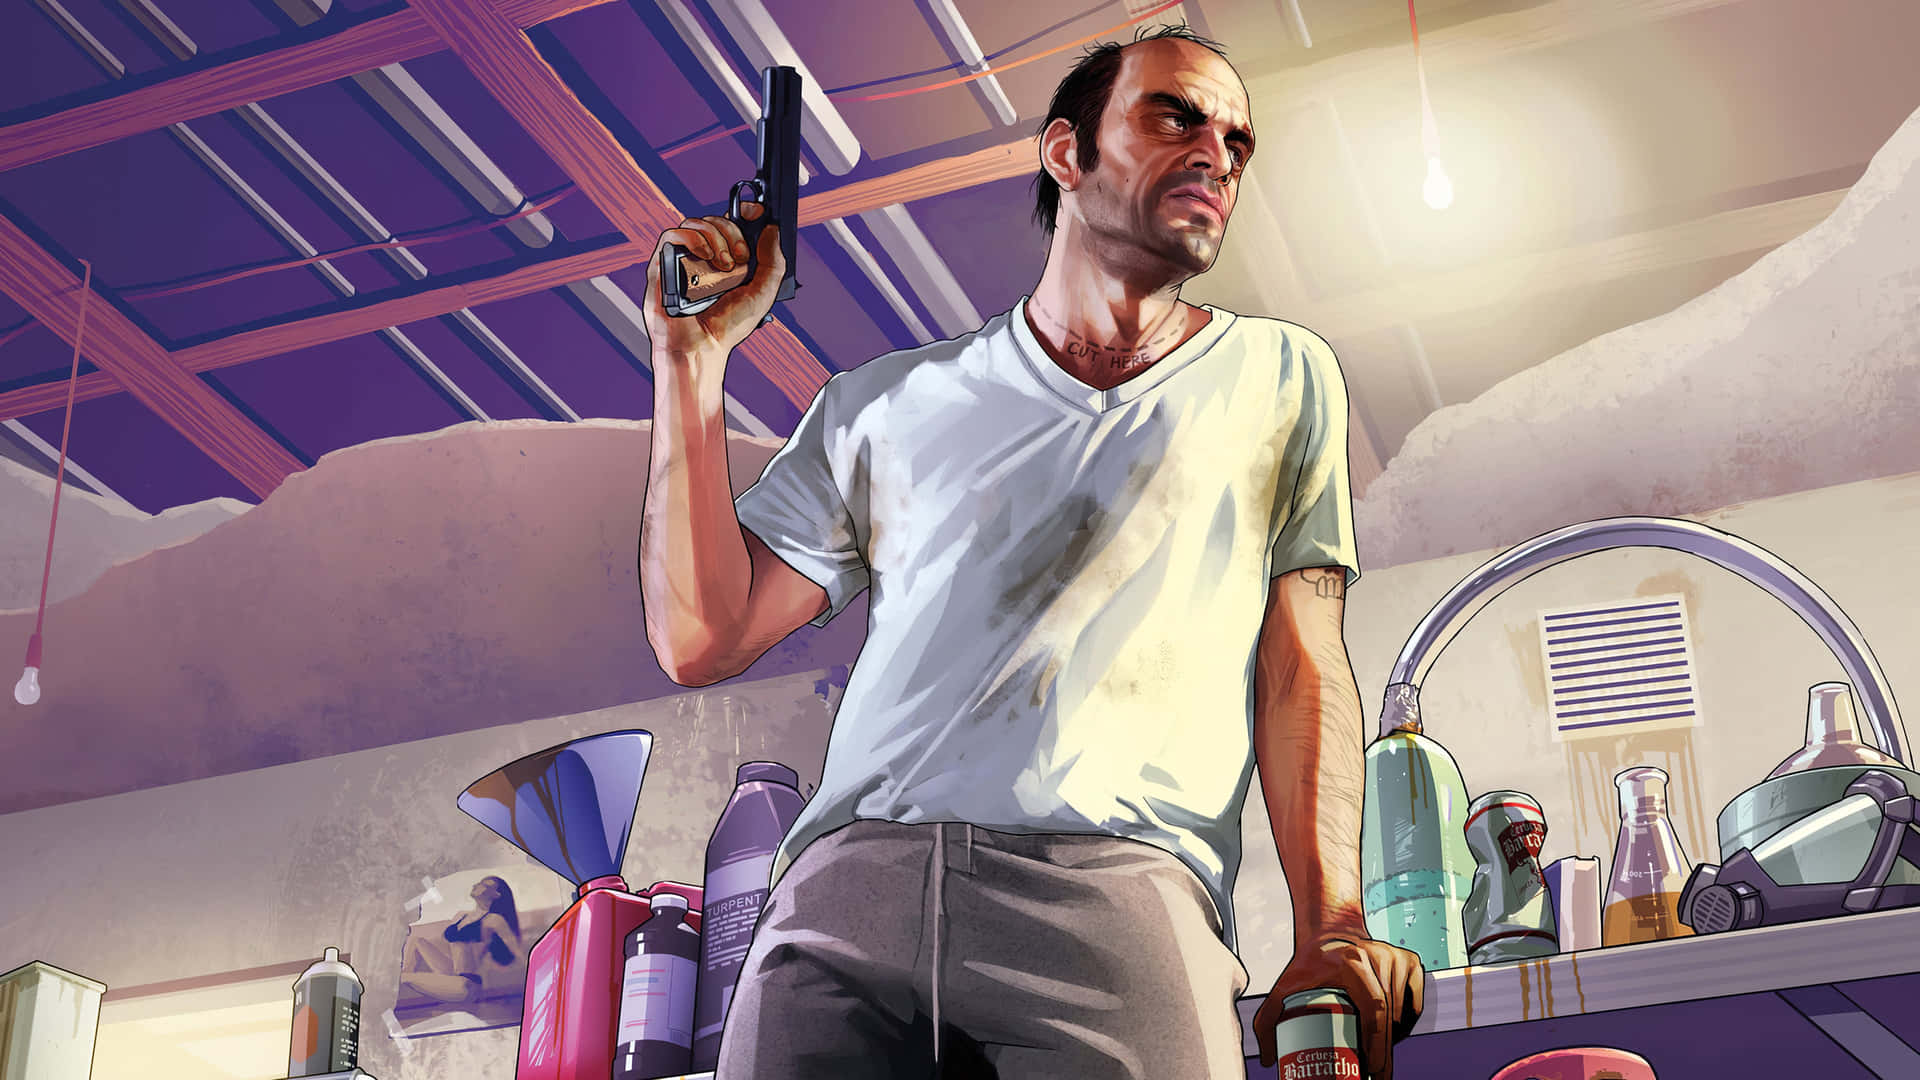 Experience Grand Theft Auto V in stunning 4K resolution. Wallpaper